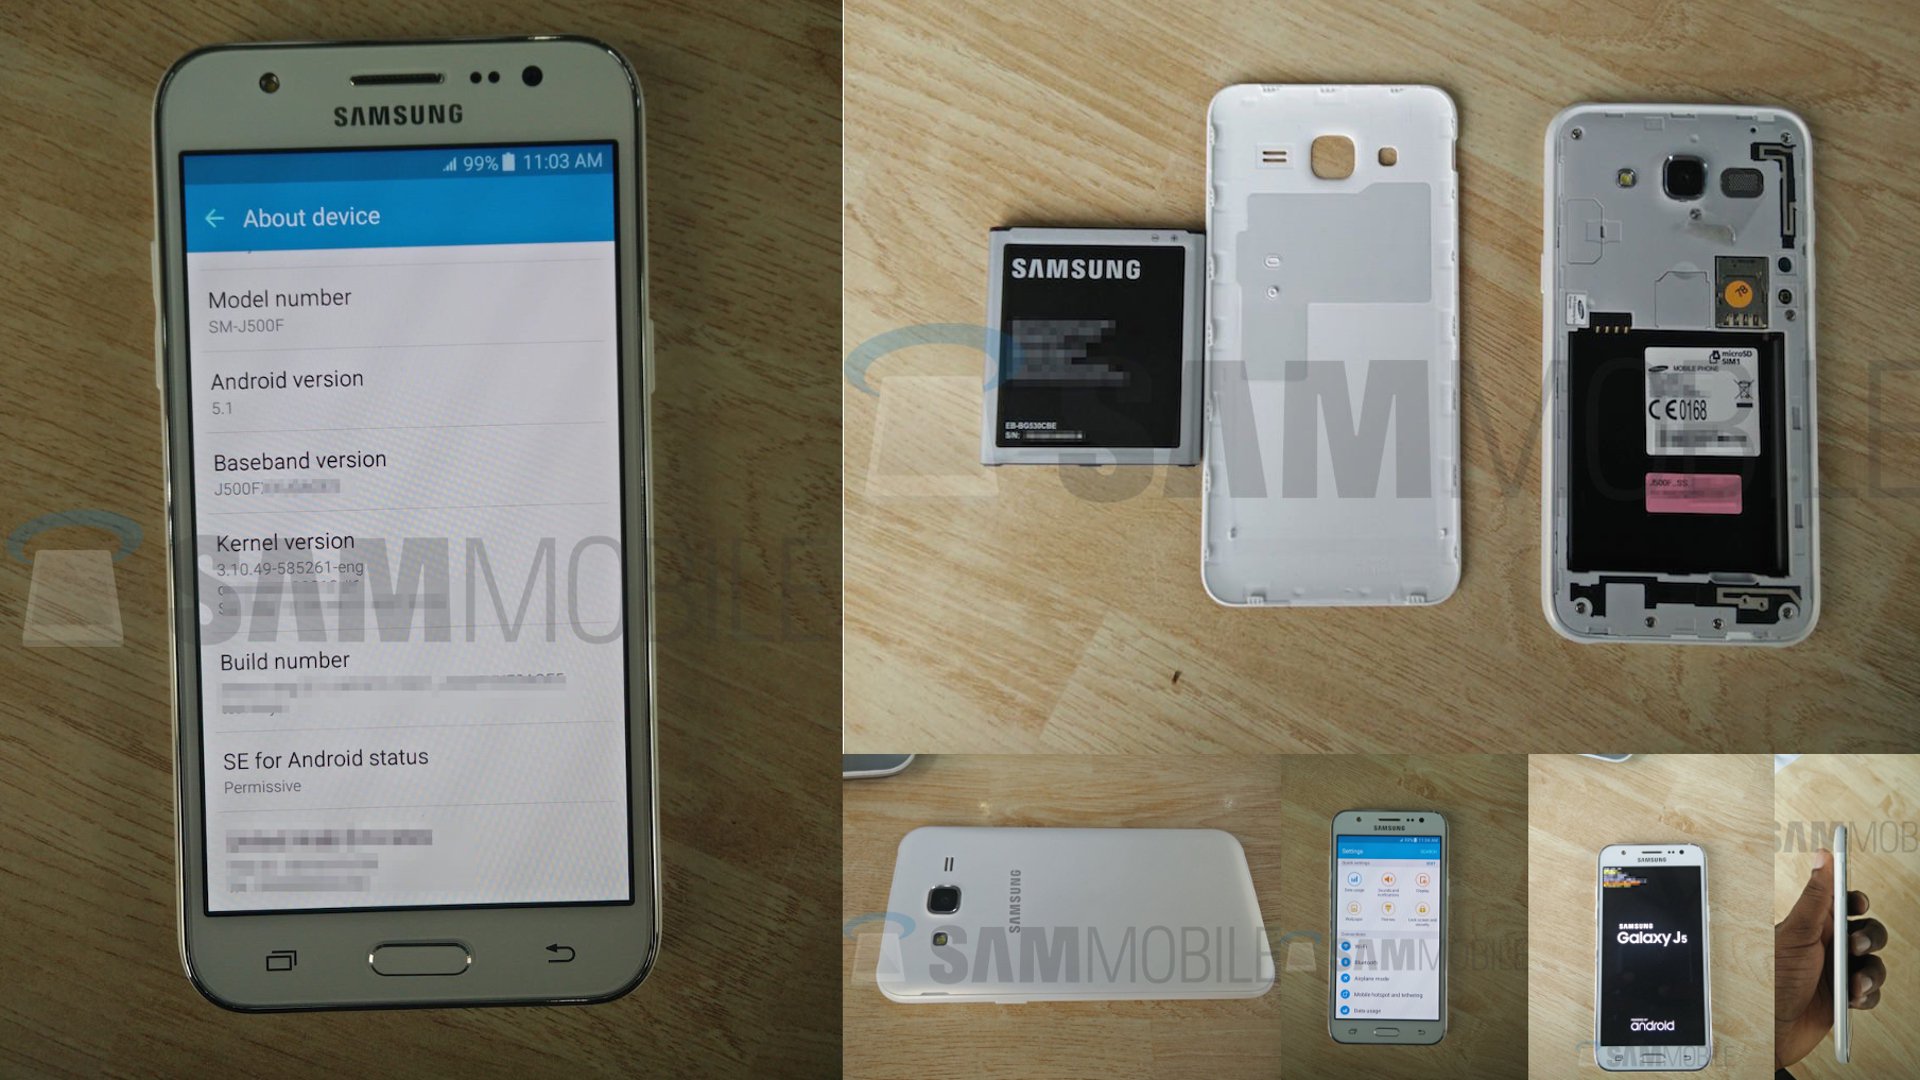 Samsung Galaxy J5 - Leaked Images